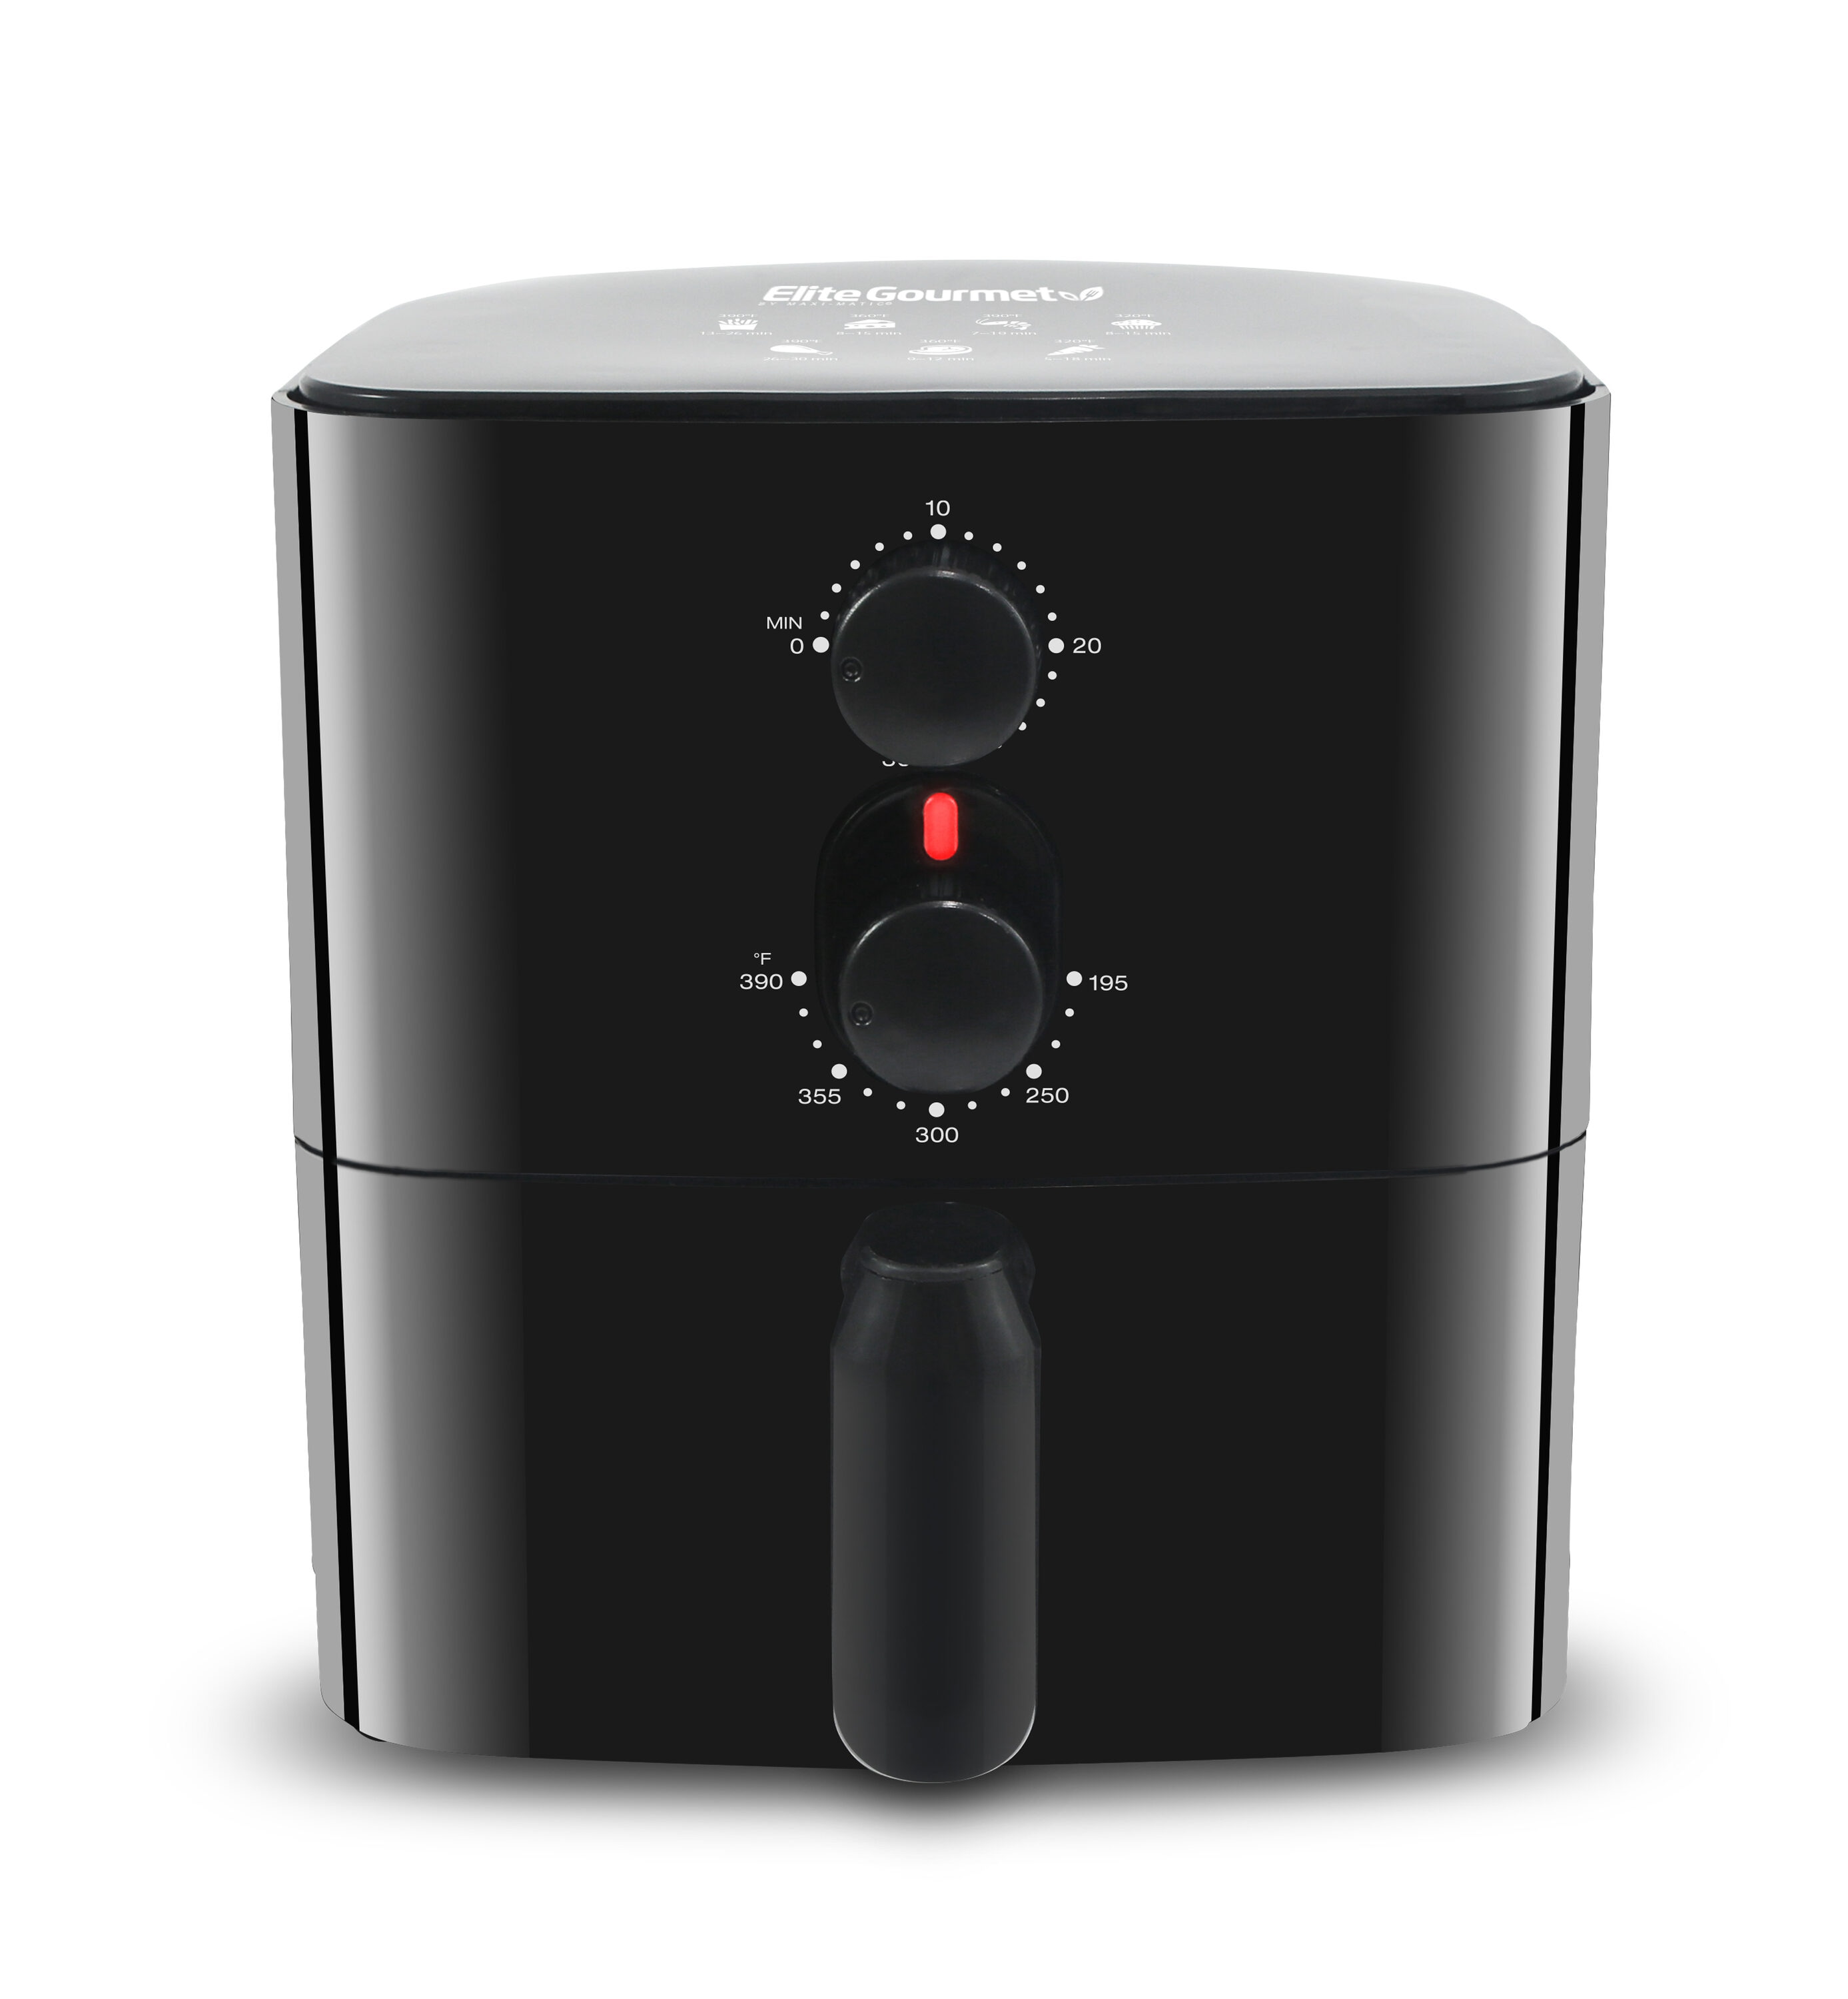 Maxi-Matic Elite Gourmet Personal Compact Space Saving Electric Hot Air  Fryer 